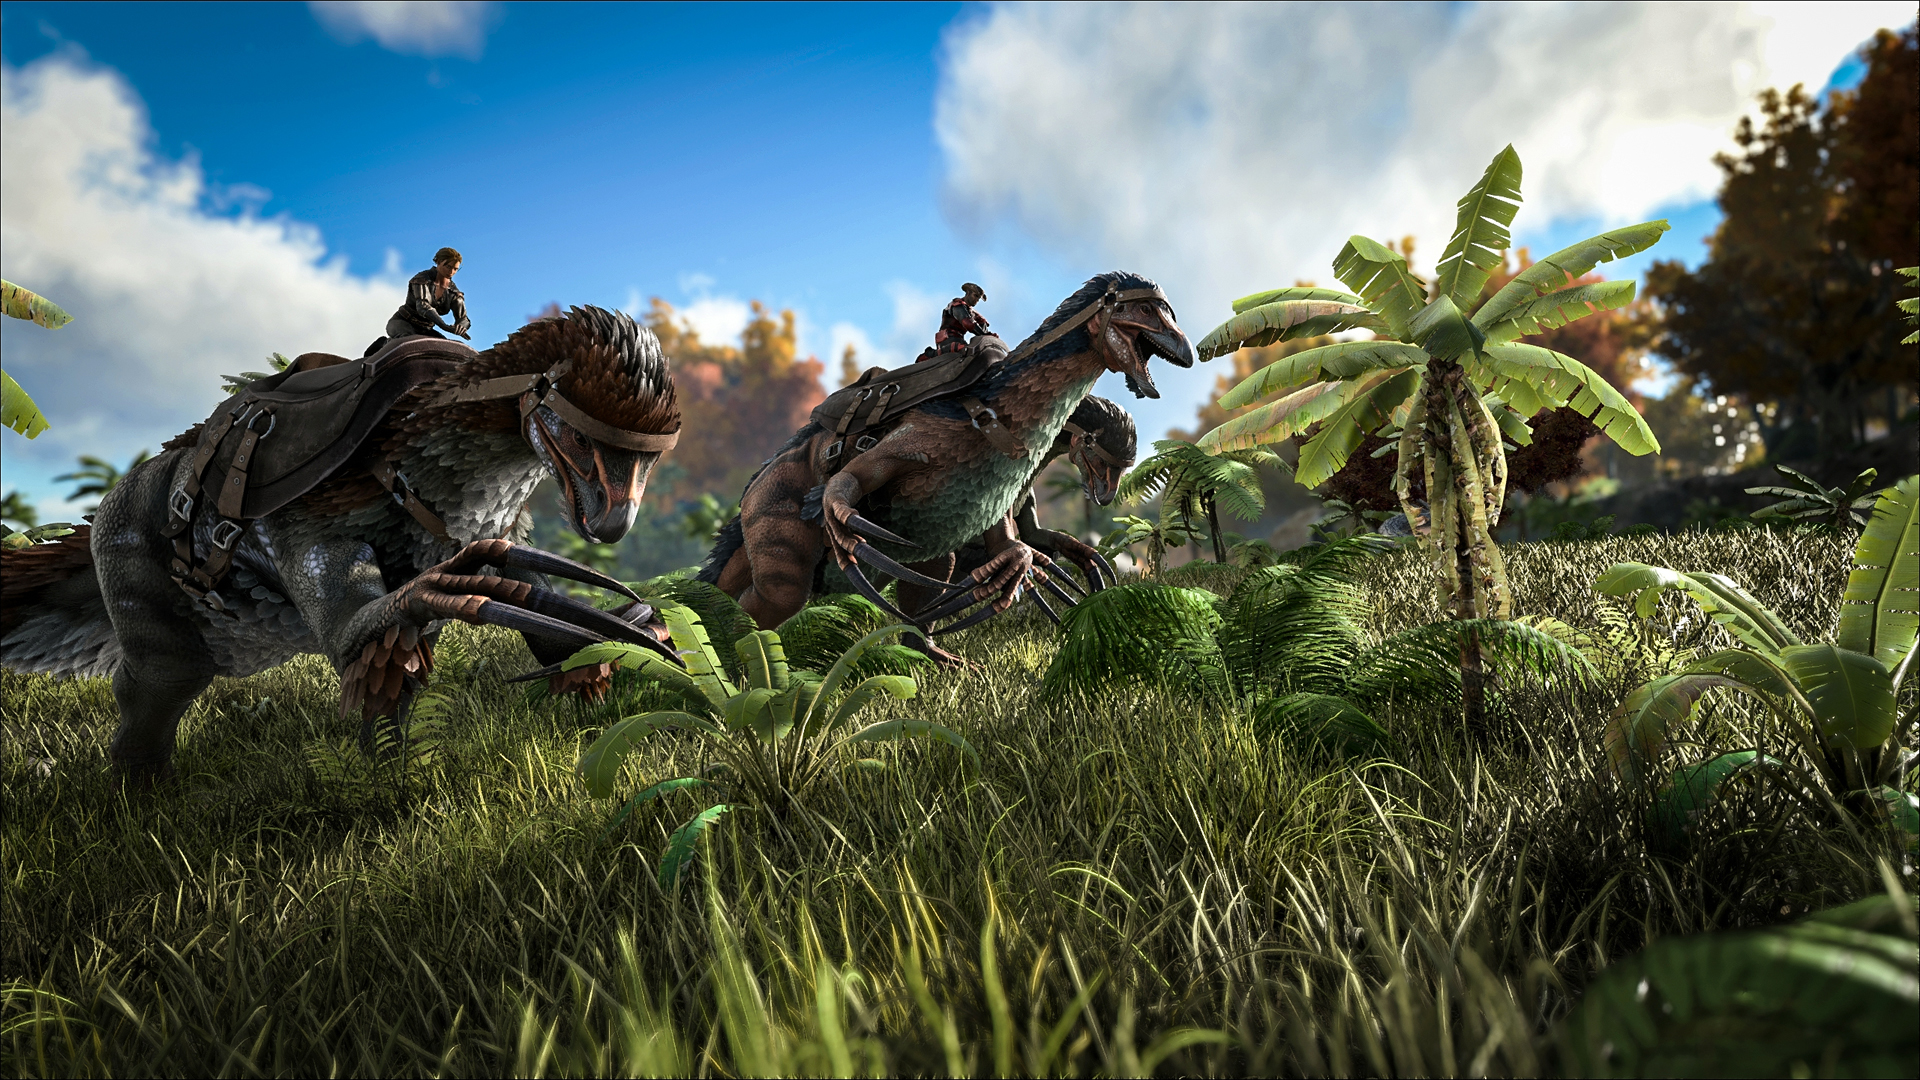 games to play with your girlfriend: Ark survival evolved screenshot